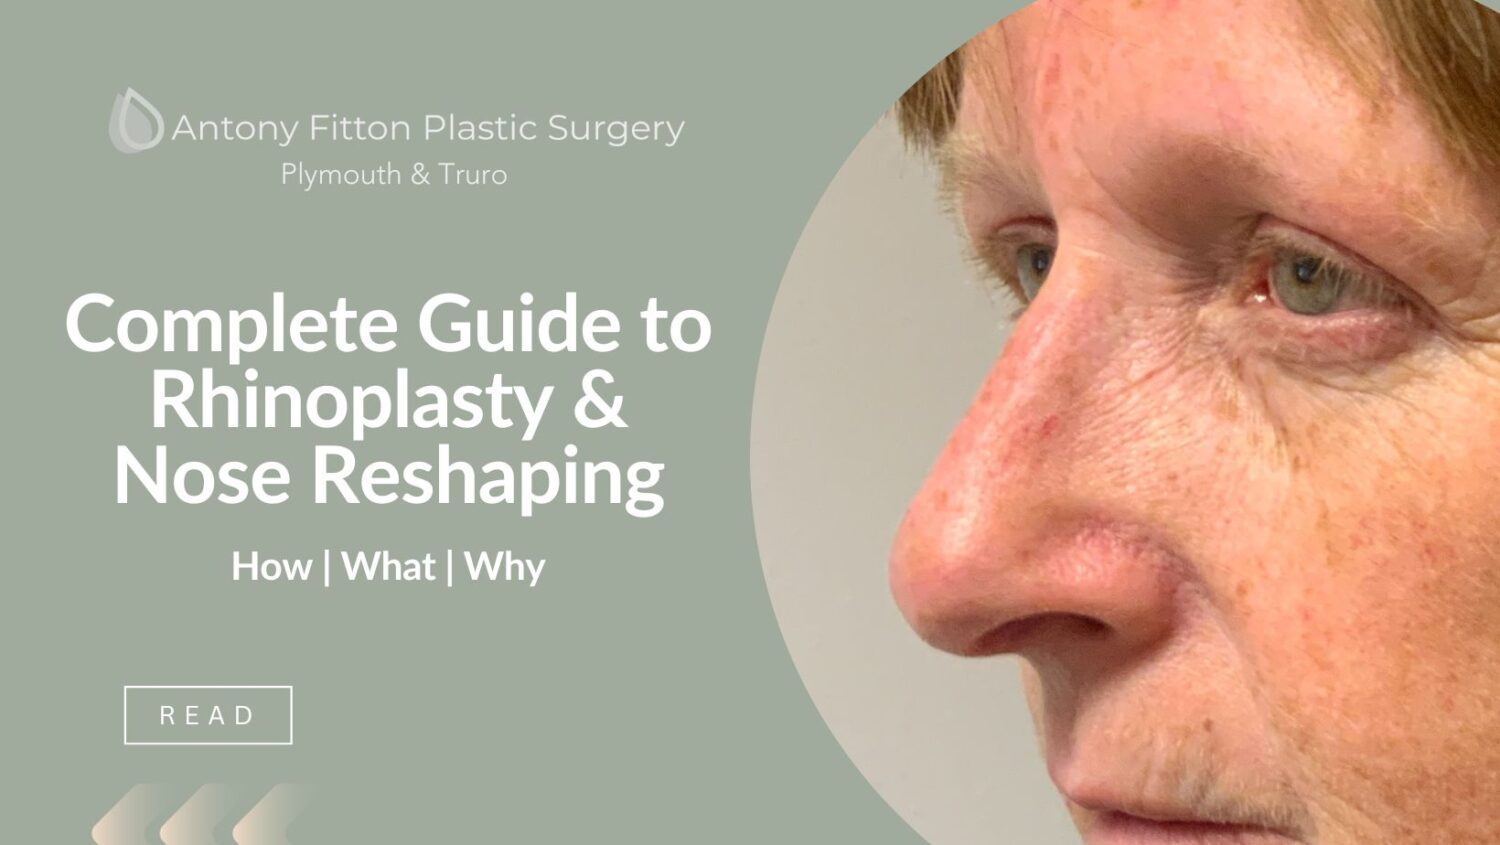 Guide to Rhinoplasty & Nose Reshaping | Antony Fitton Plastic Surgery | Plymouth and Truro